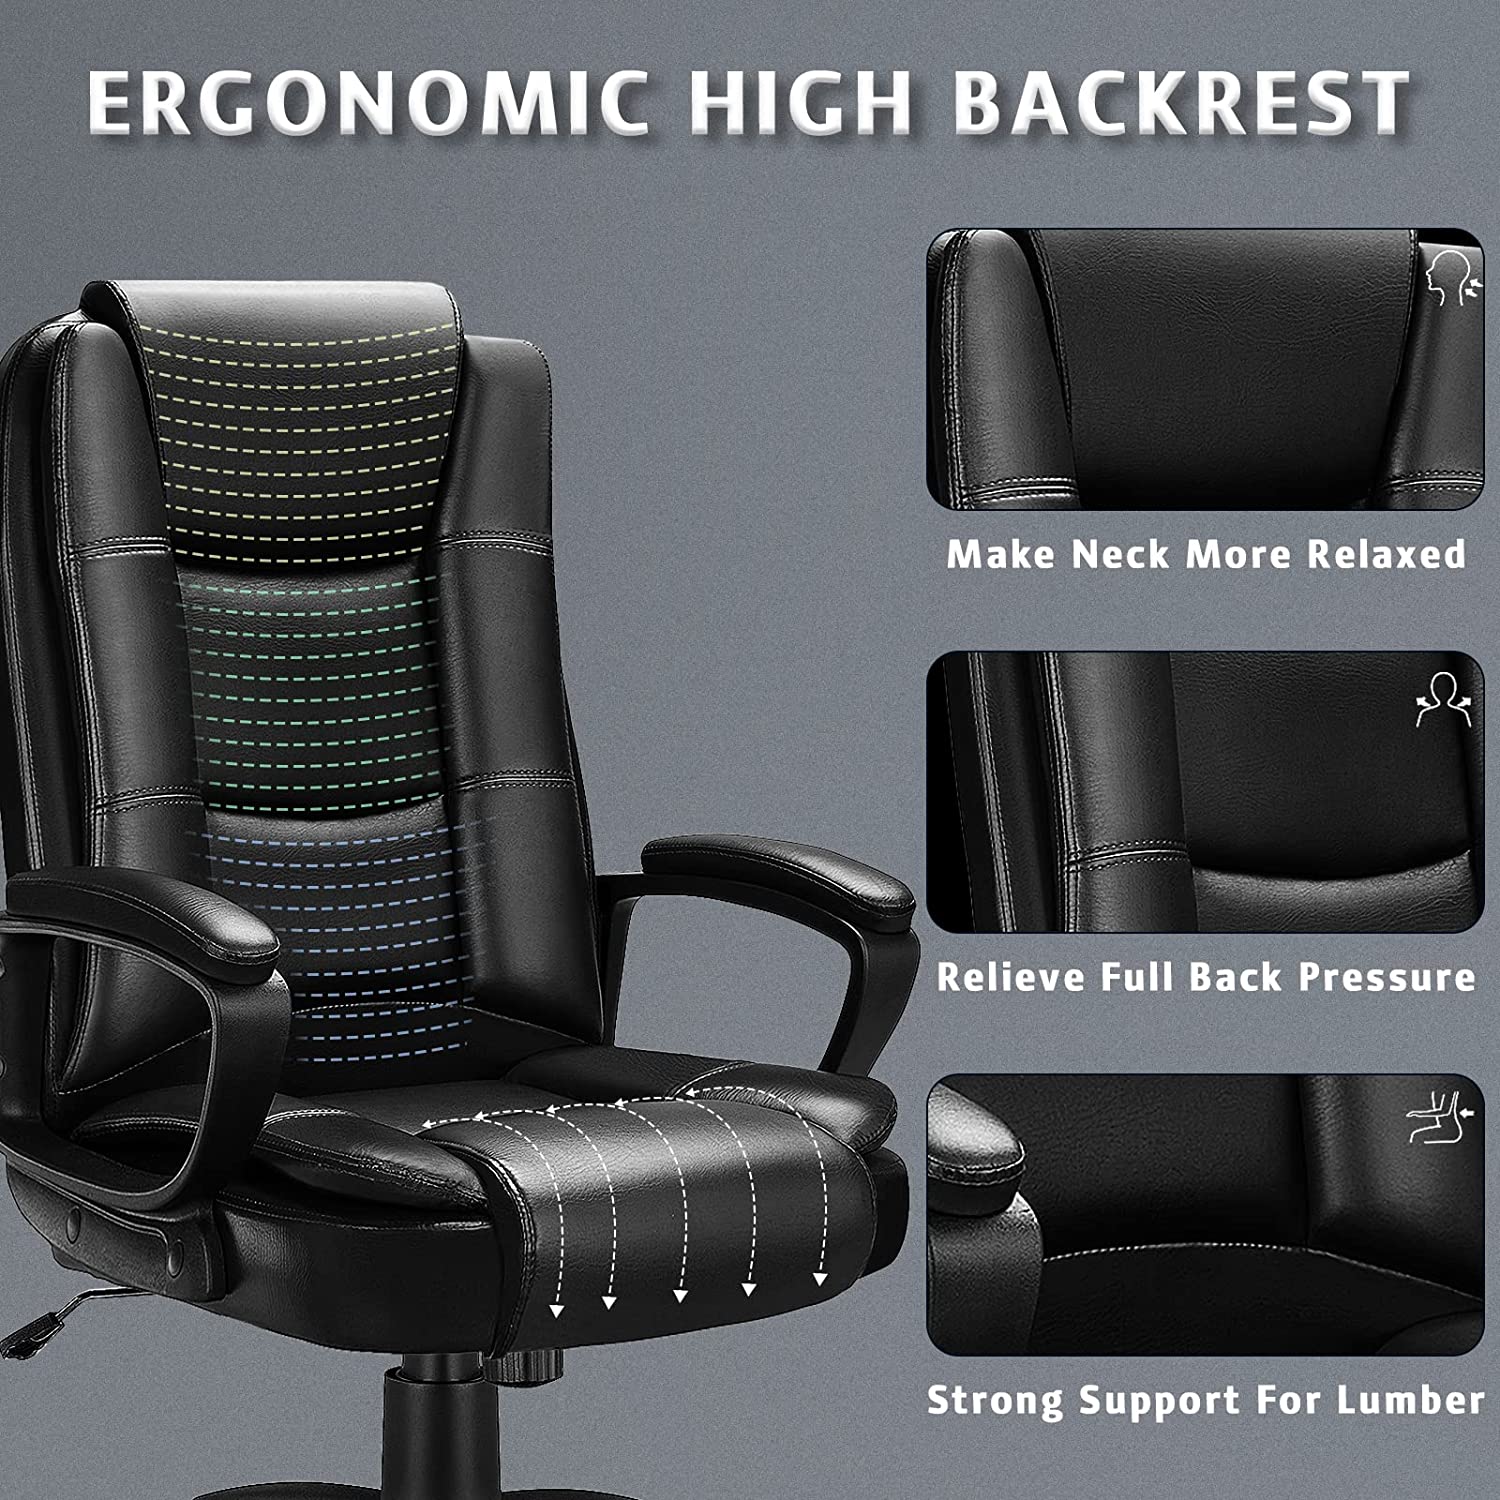 Waleaf Home Office Chair, Big and Tall Desk Chair 8Hours Heavy Duty Design, Ergonomic High Back Cushion Lumbar Back Support, Computer Desk Chair, Adjustable Executive Leather Chair with Arms - image 2 of 8